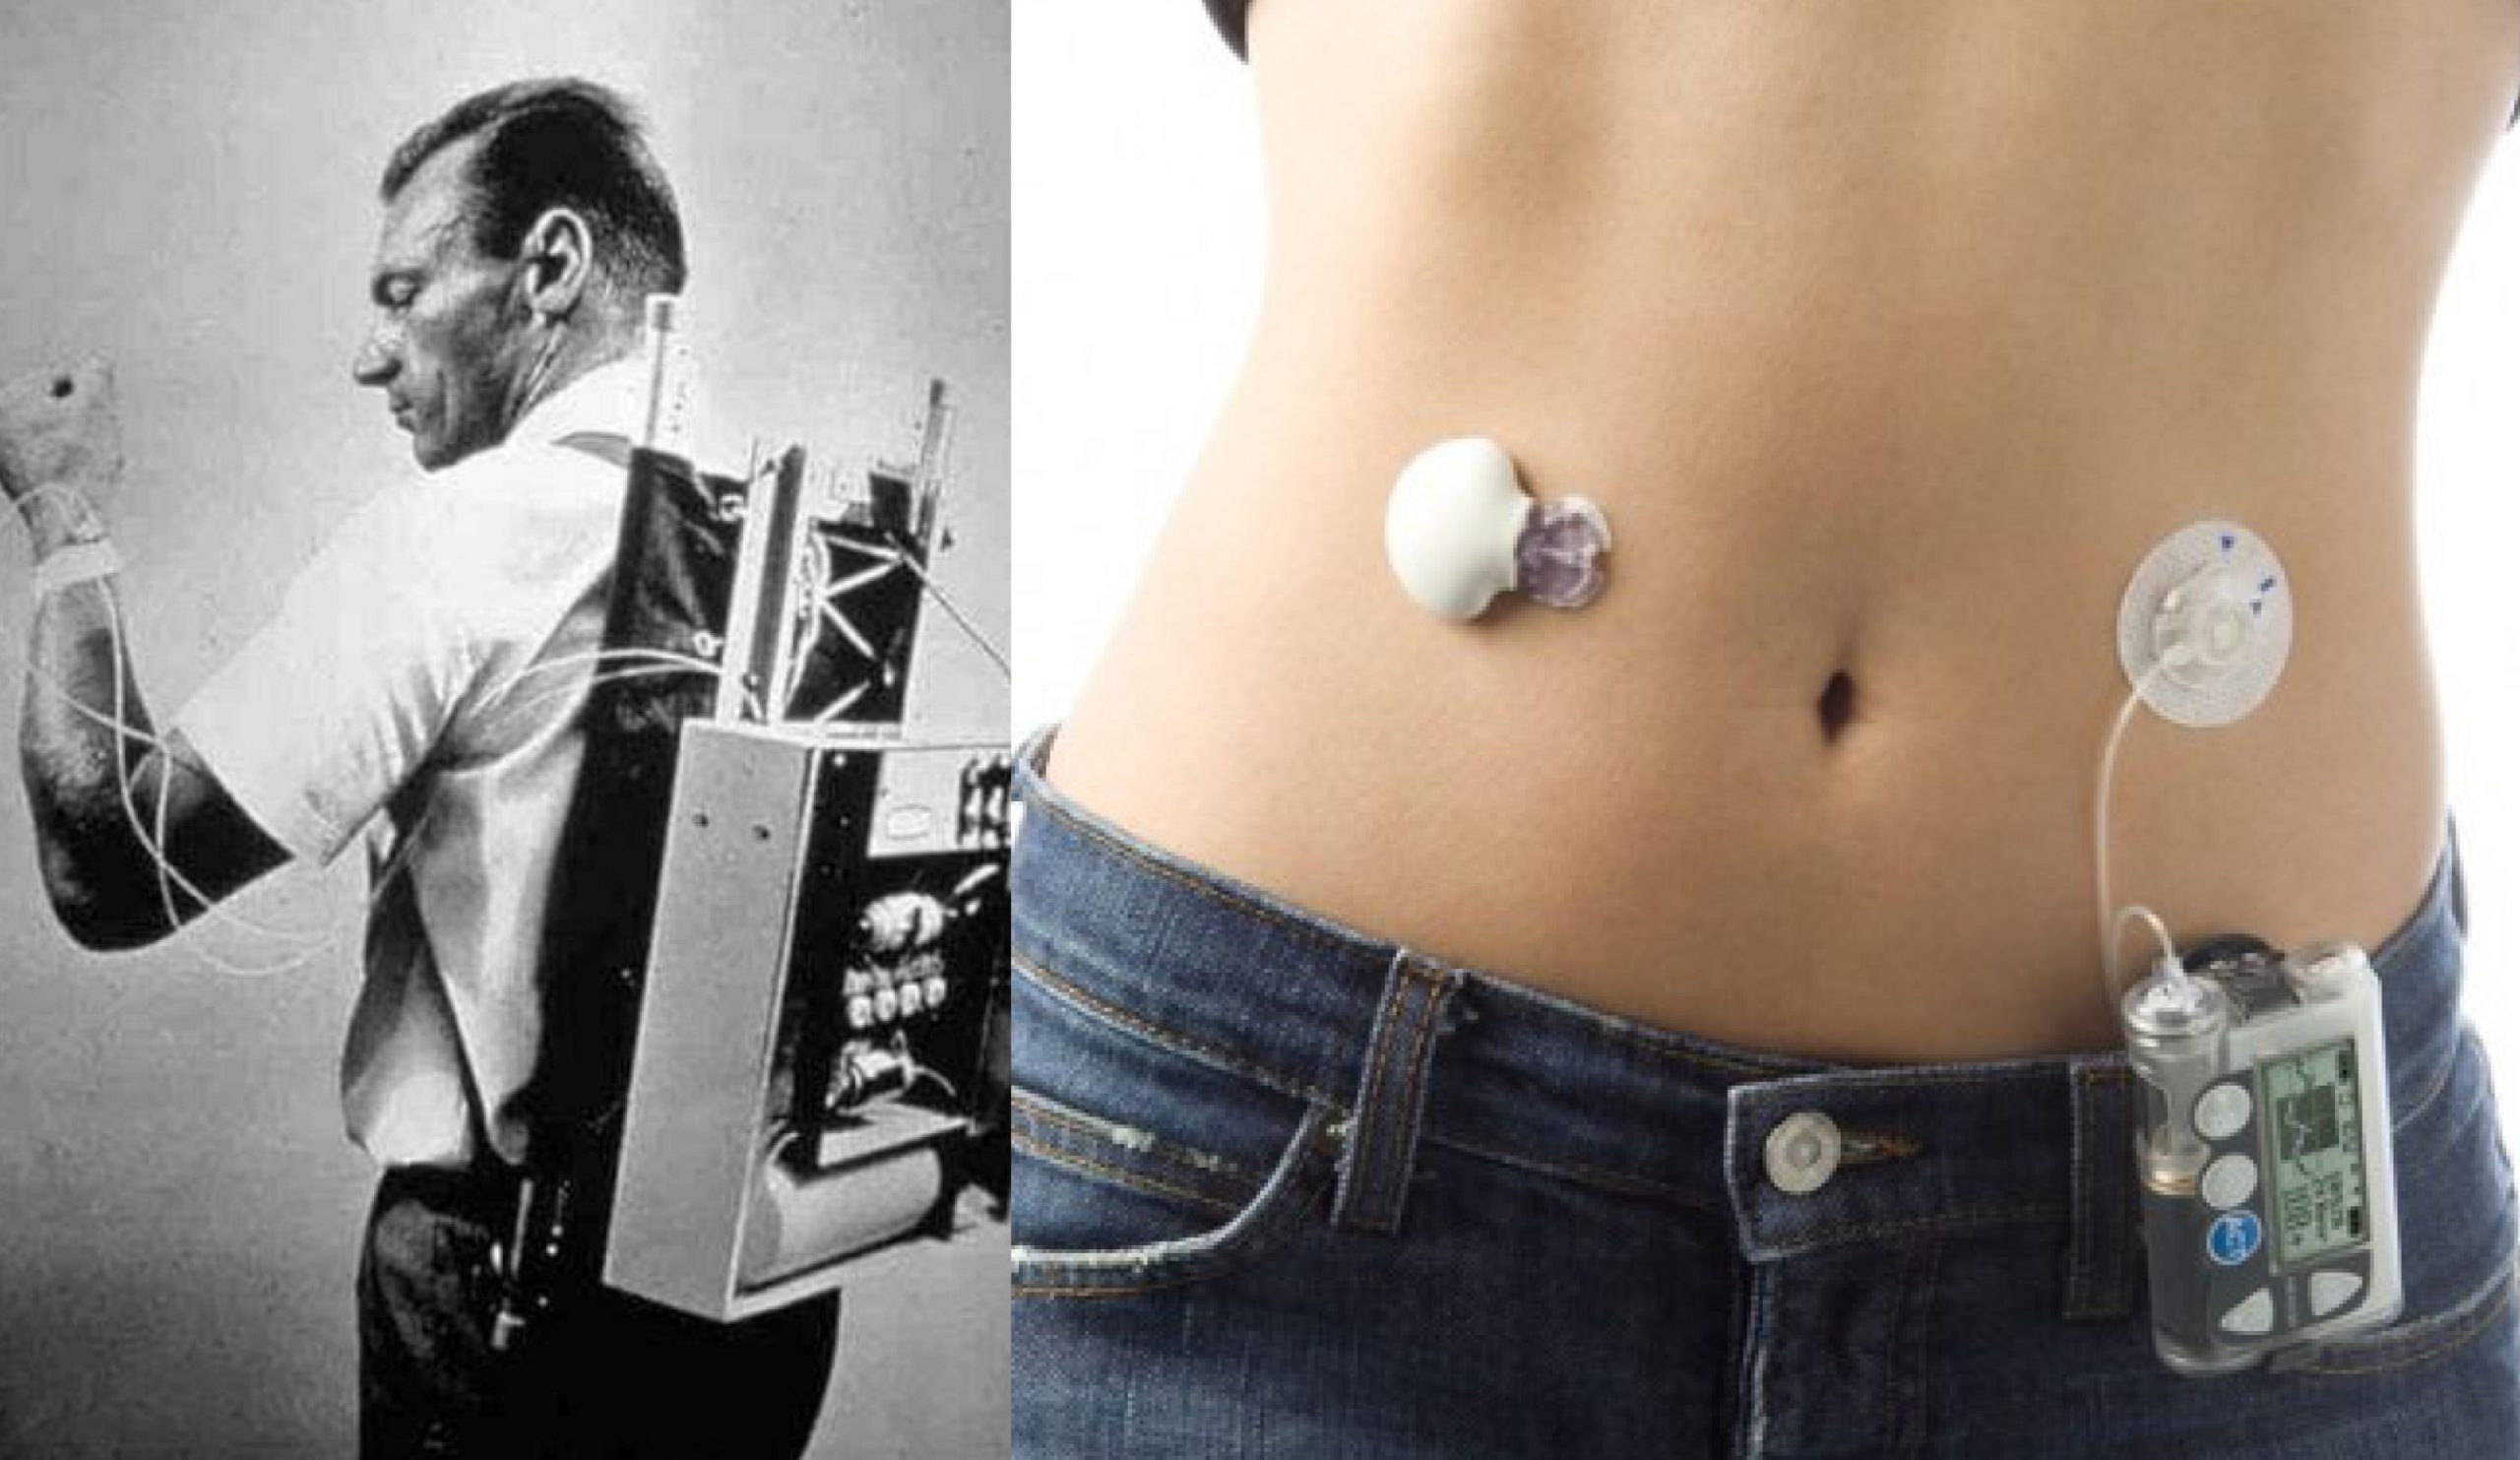 The Biostator may be the world’s first portable insulin pump, but it was completely impractical. It paved the way however, to what we have today – tiny automated devices that take the debilitating out of diabetes.